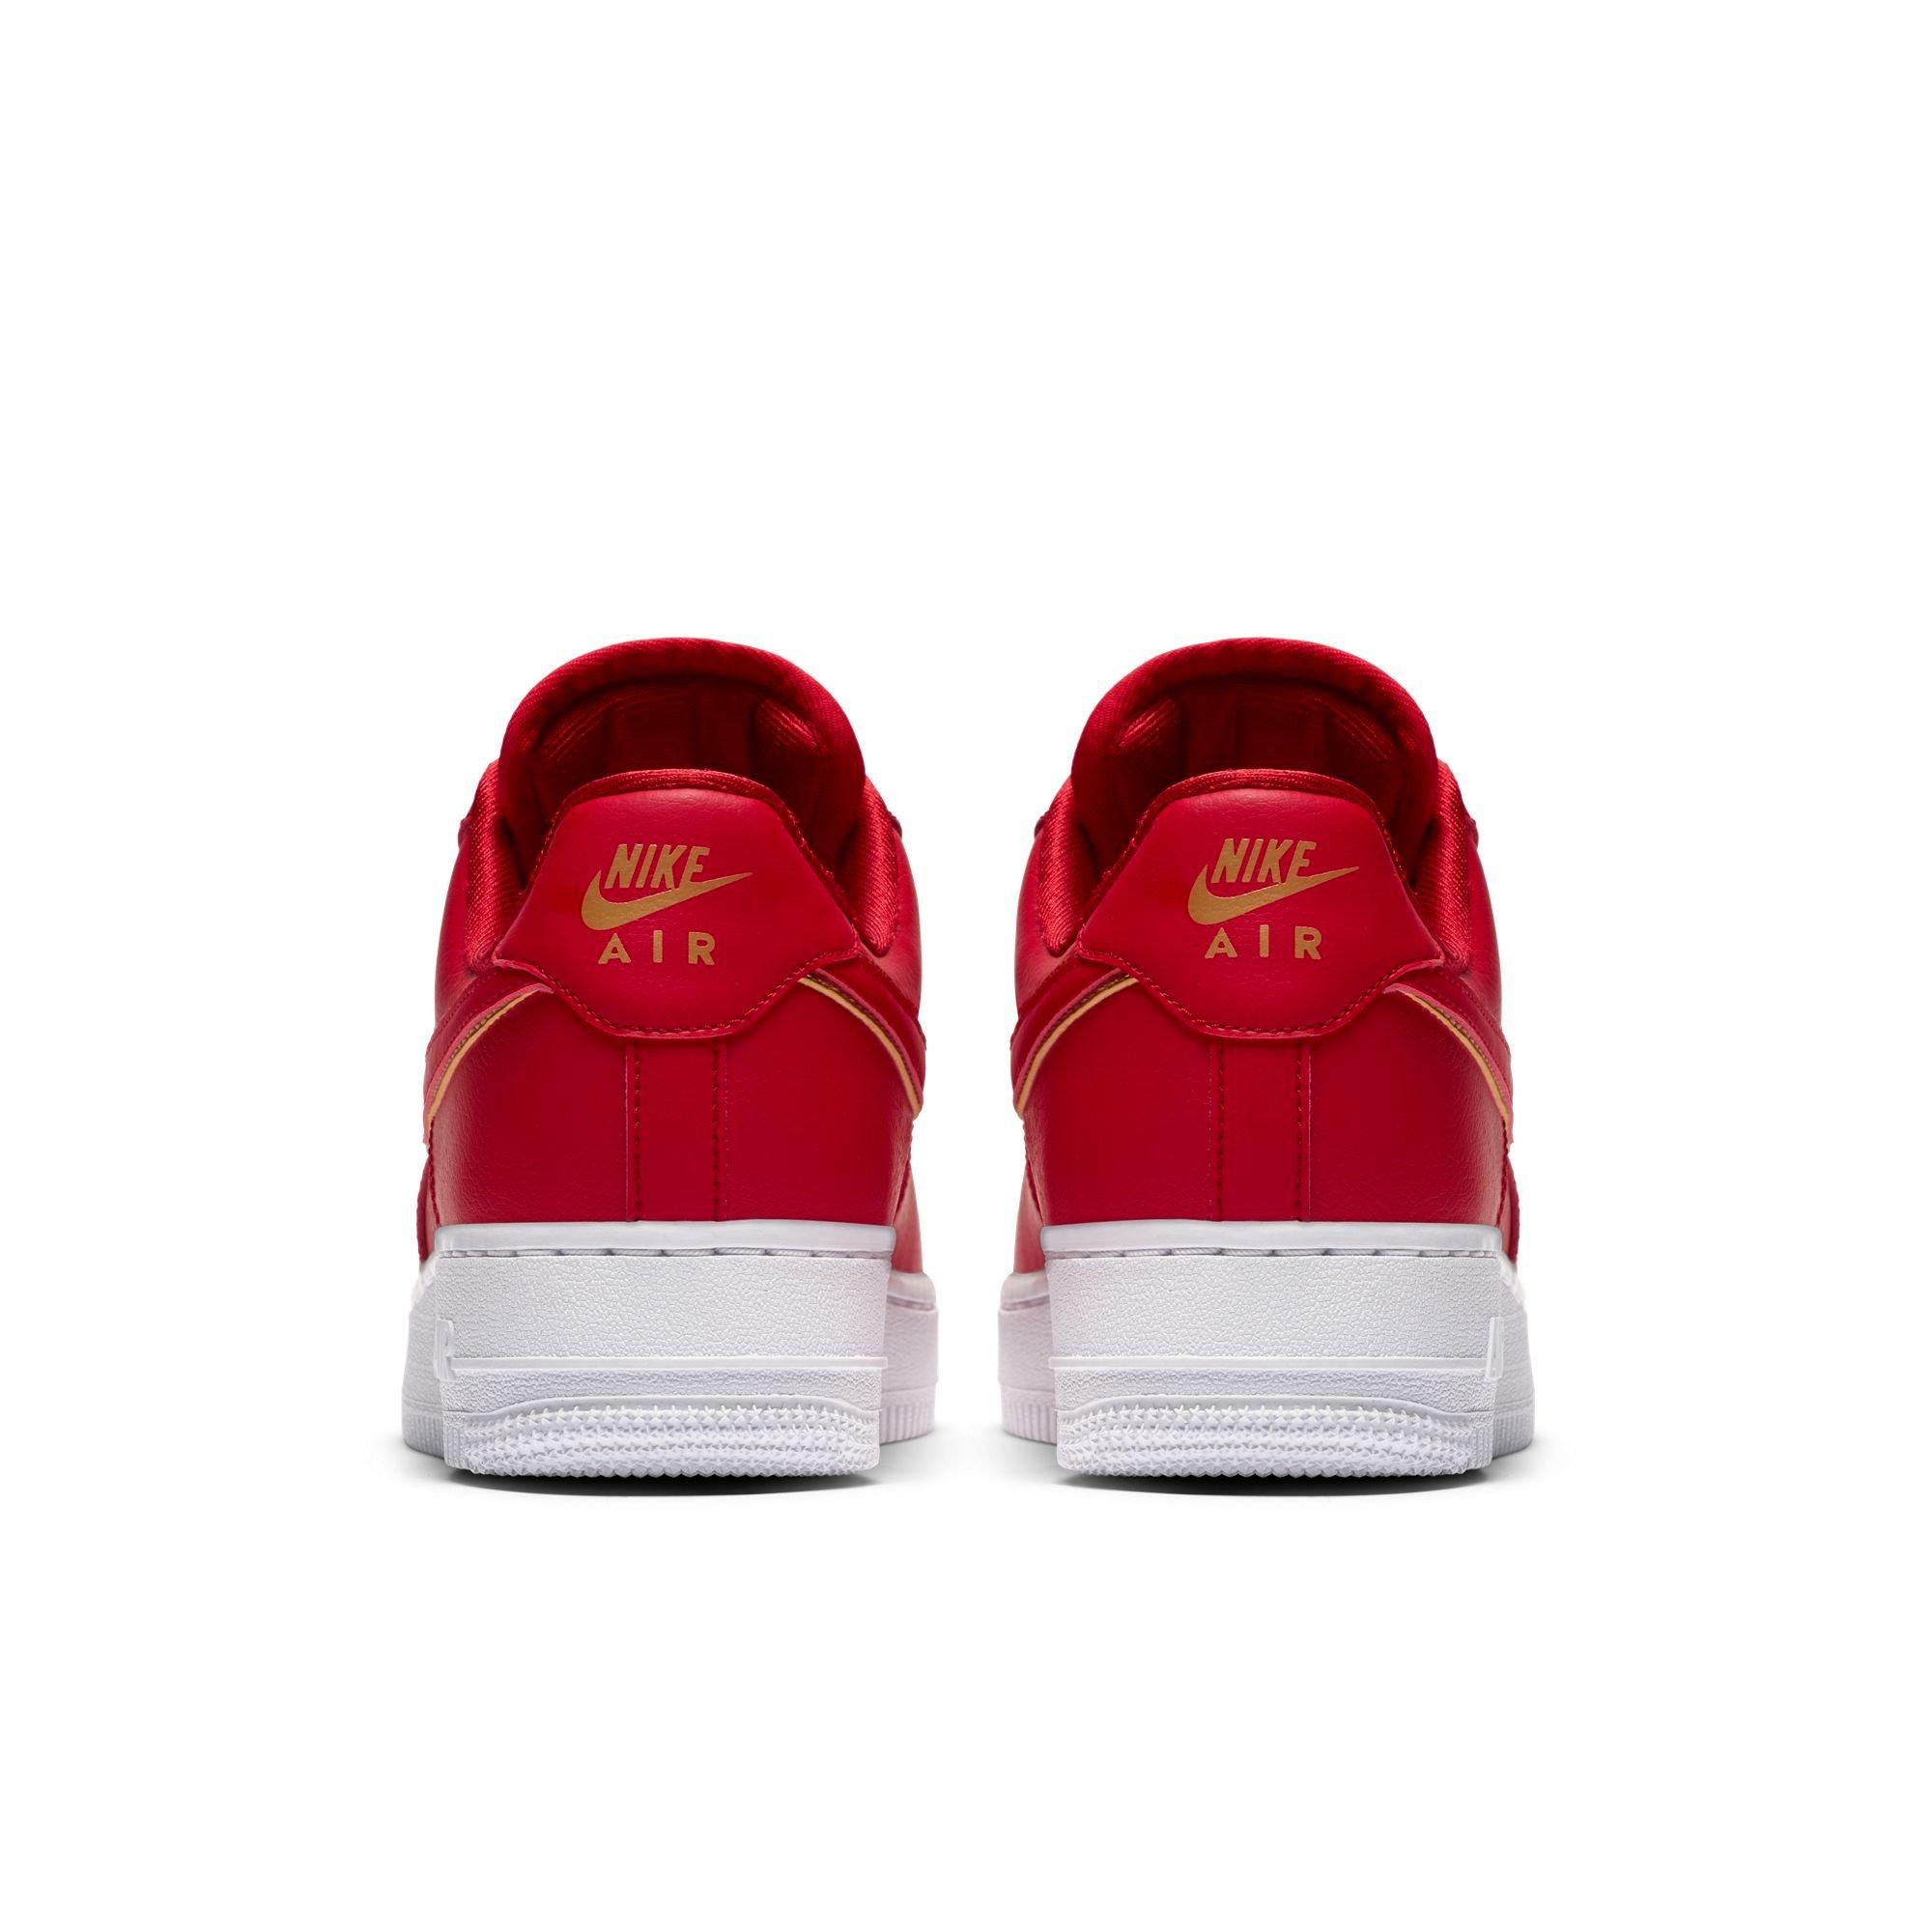 red and gold nike air force 1